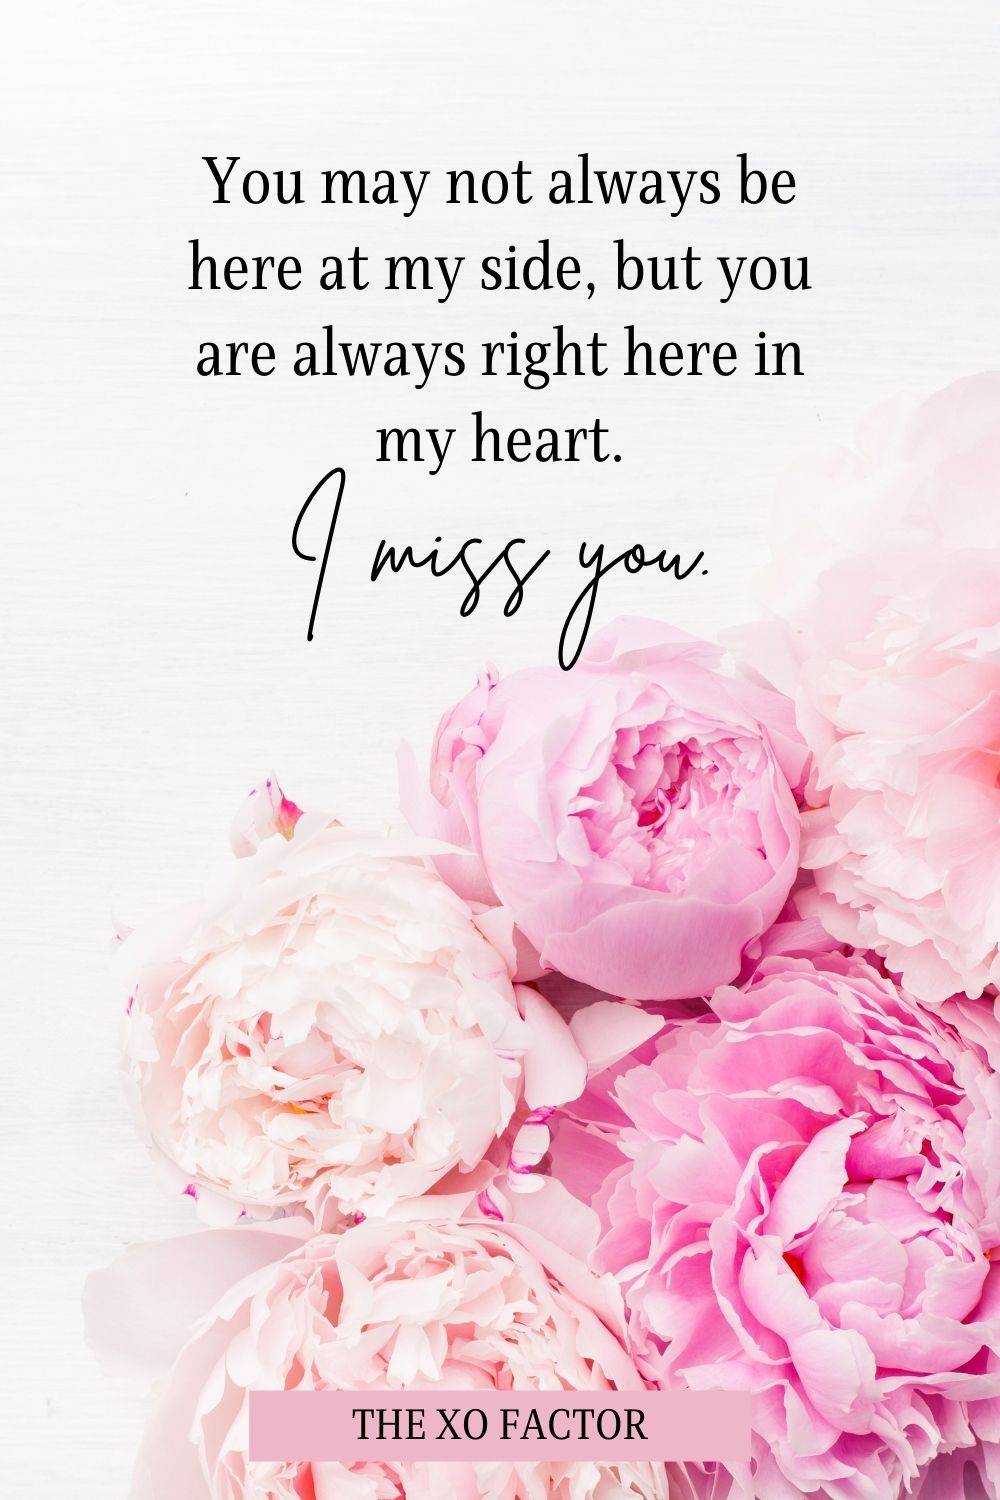 You may not always be here at my side, but you are always right here in my heart. I miss you.